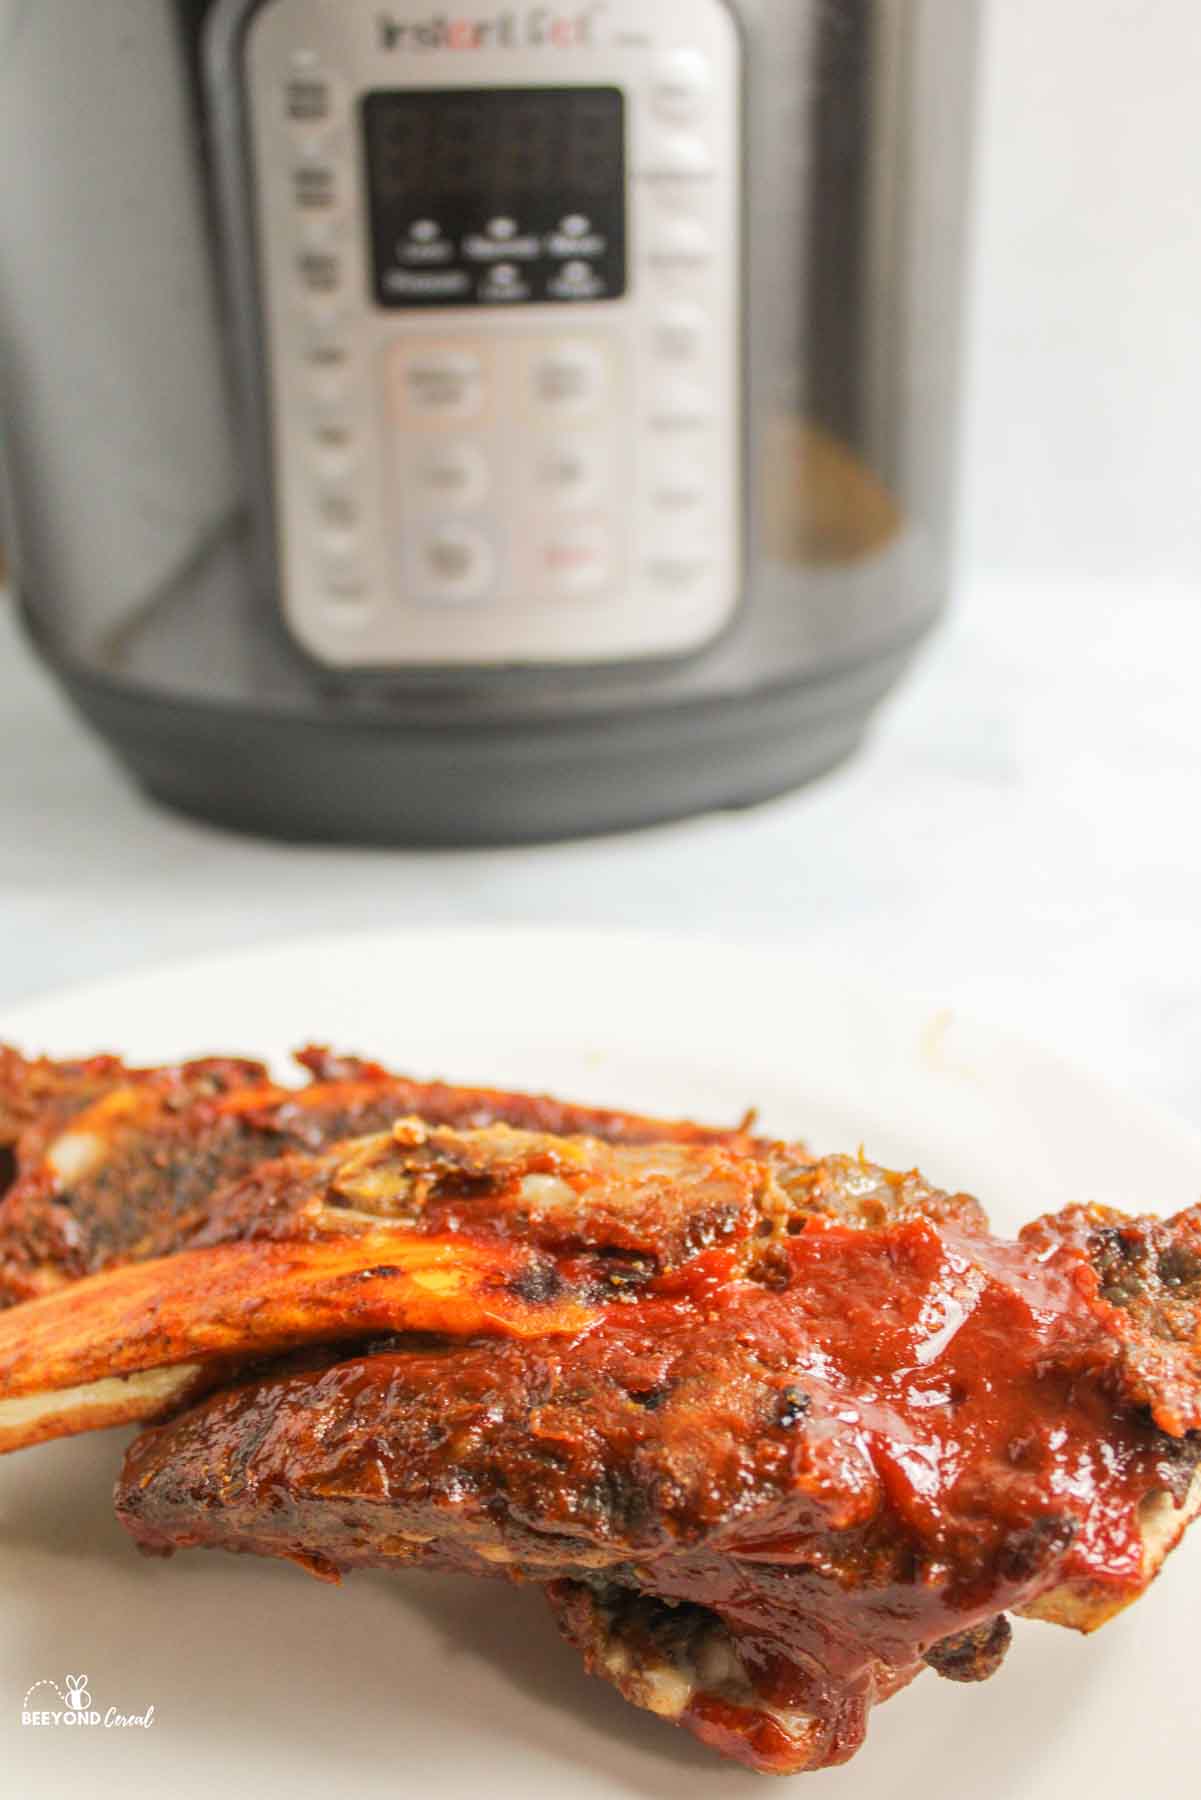 BBQ beef ribs in front of instant pot